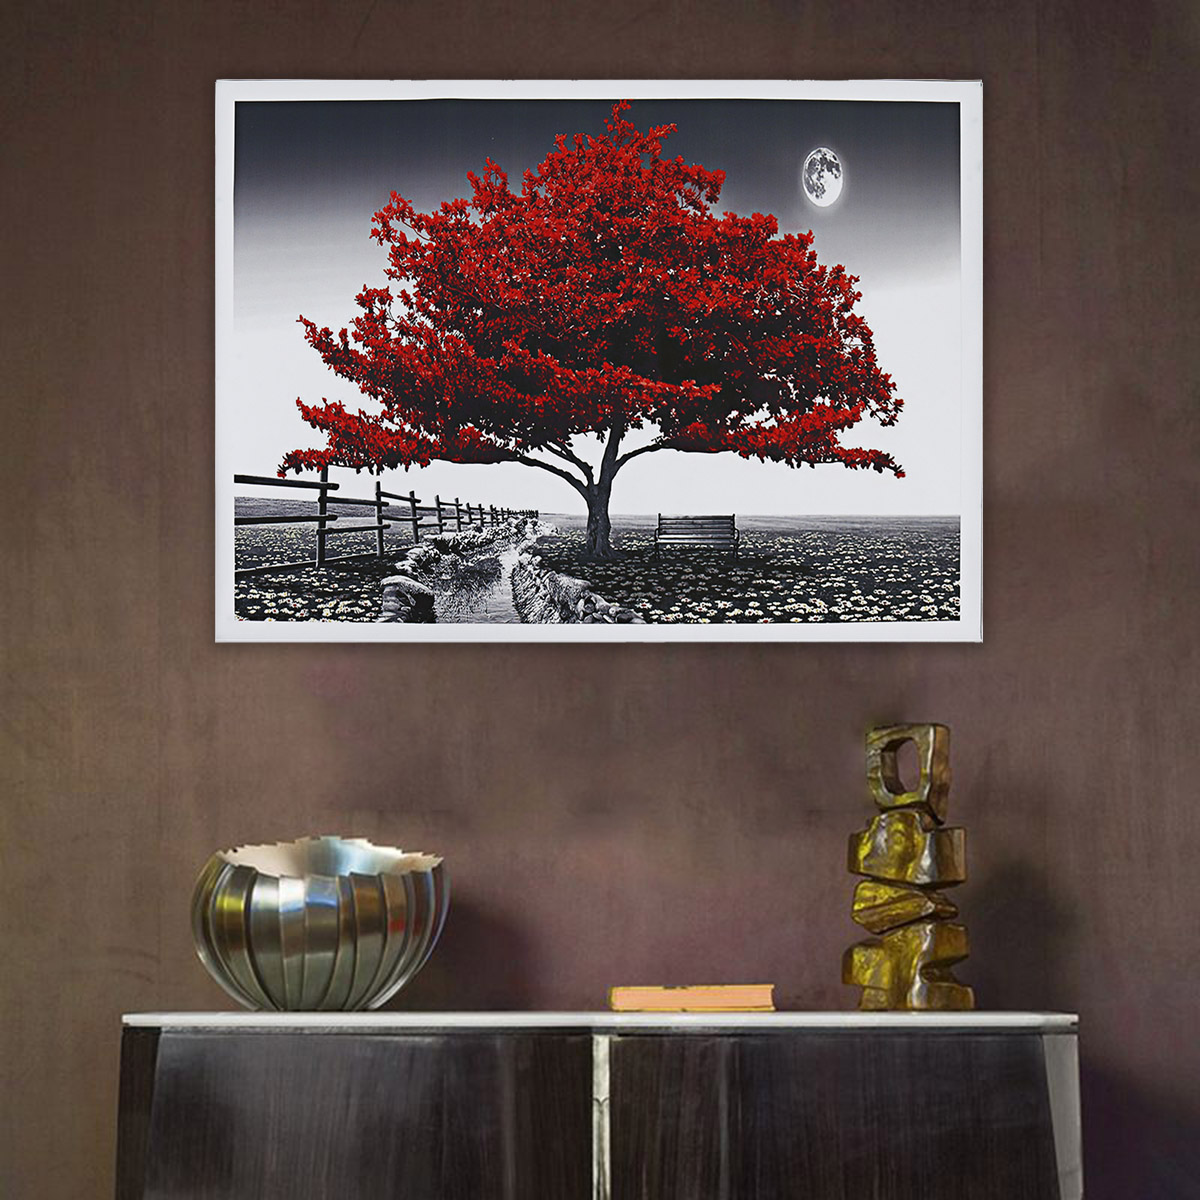 1-Piece-Big-Tree-Canvas-Painting-Wall-Decorative-Print-Art-Picture-Unframed-Wall-Hanging-Home-Office-1785043-18